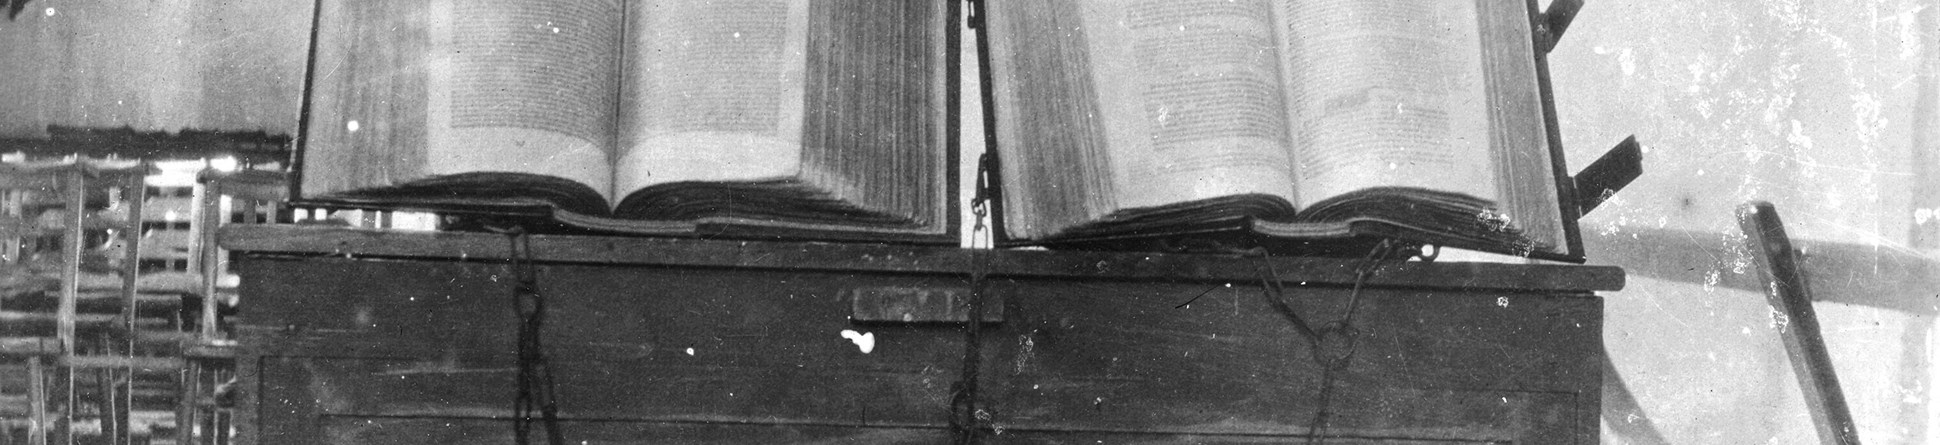 Two books chained to a desk inside St Michael's Church Blewbury, in 1909.